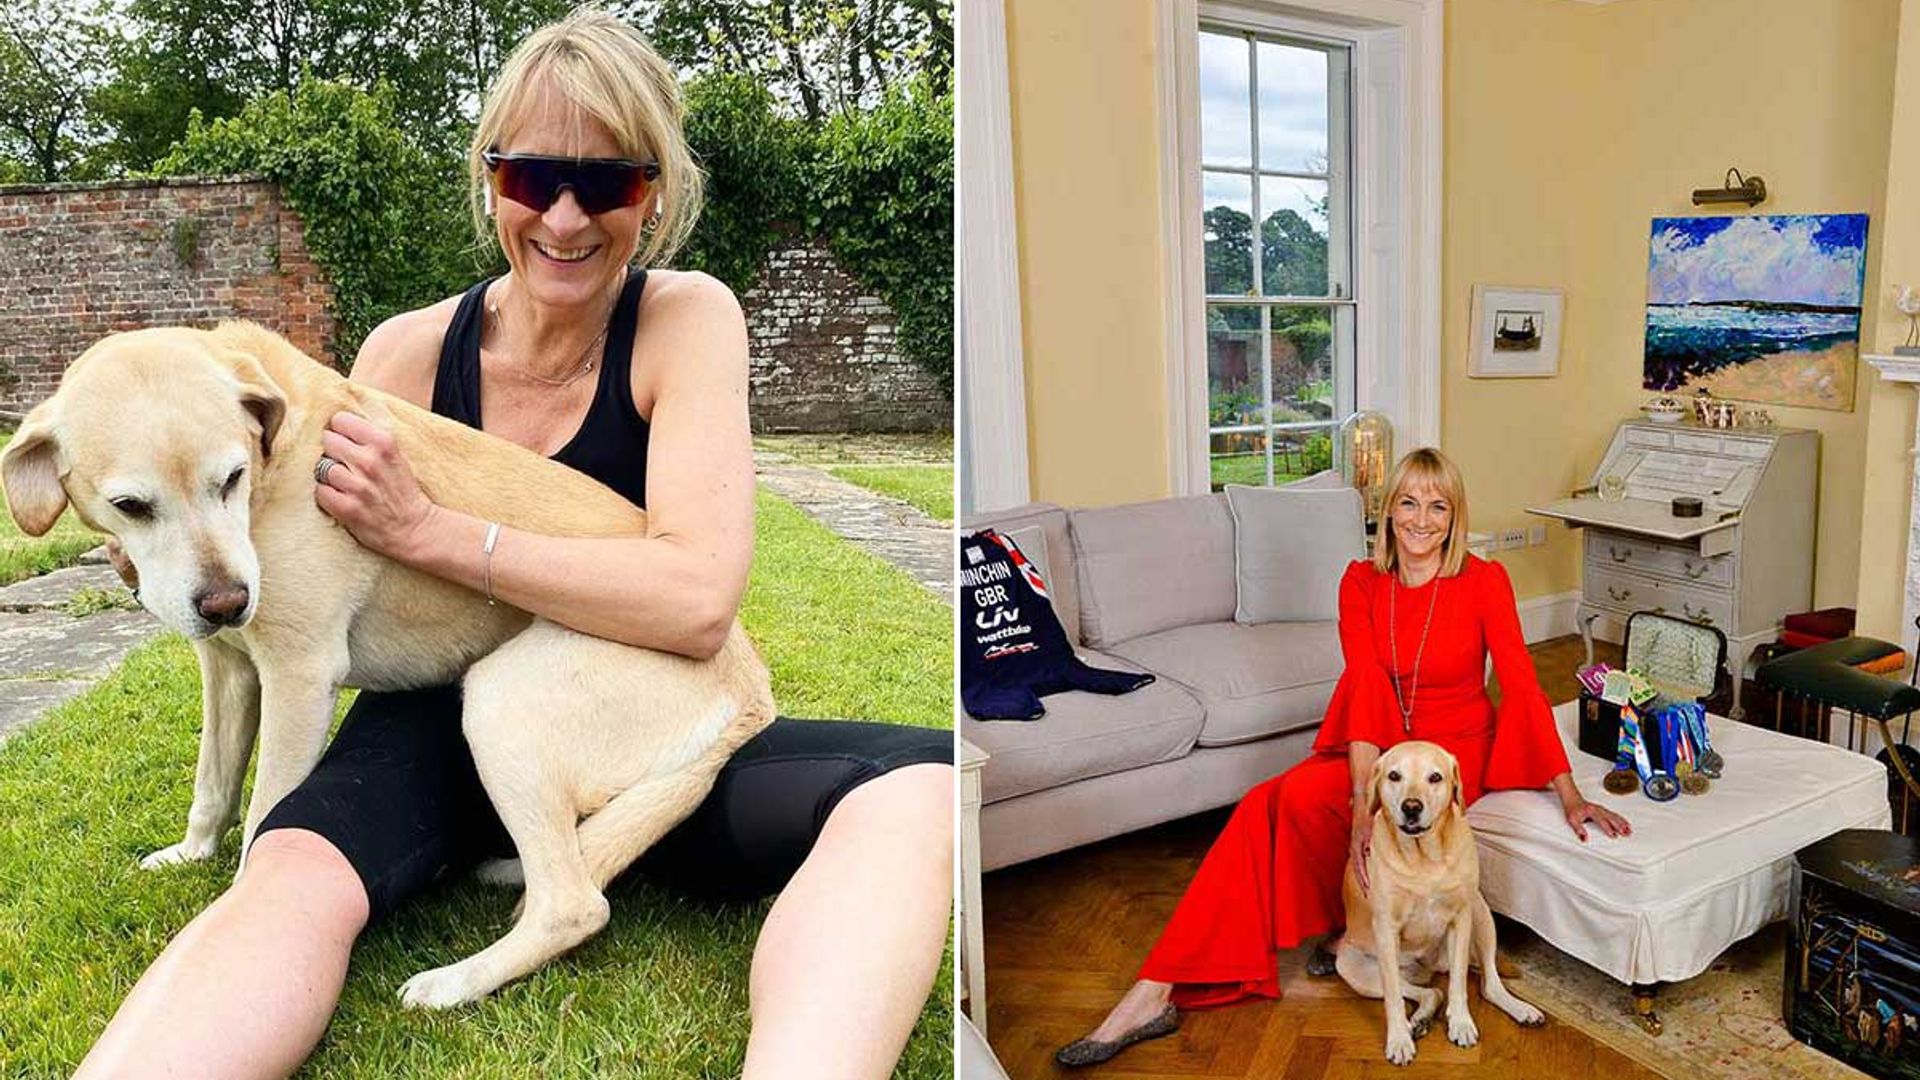 Louise Minchin's vintage home she bought for BBC Breakfast - see inside